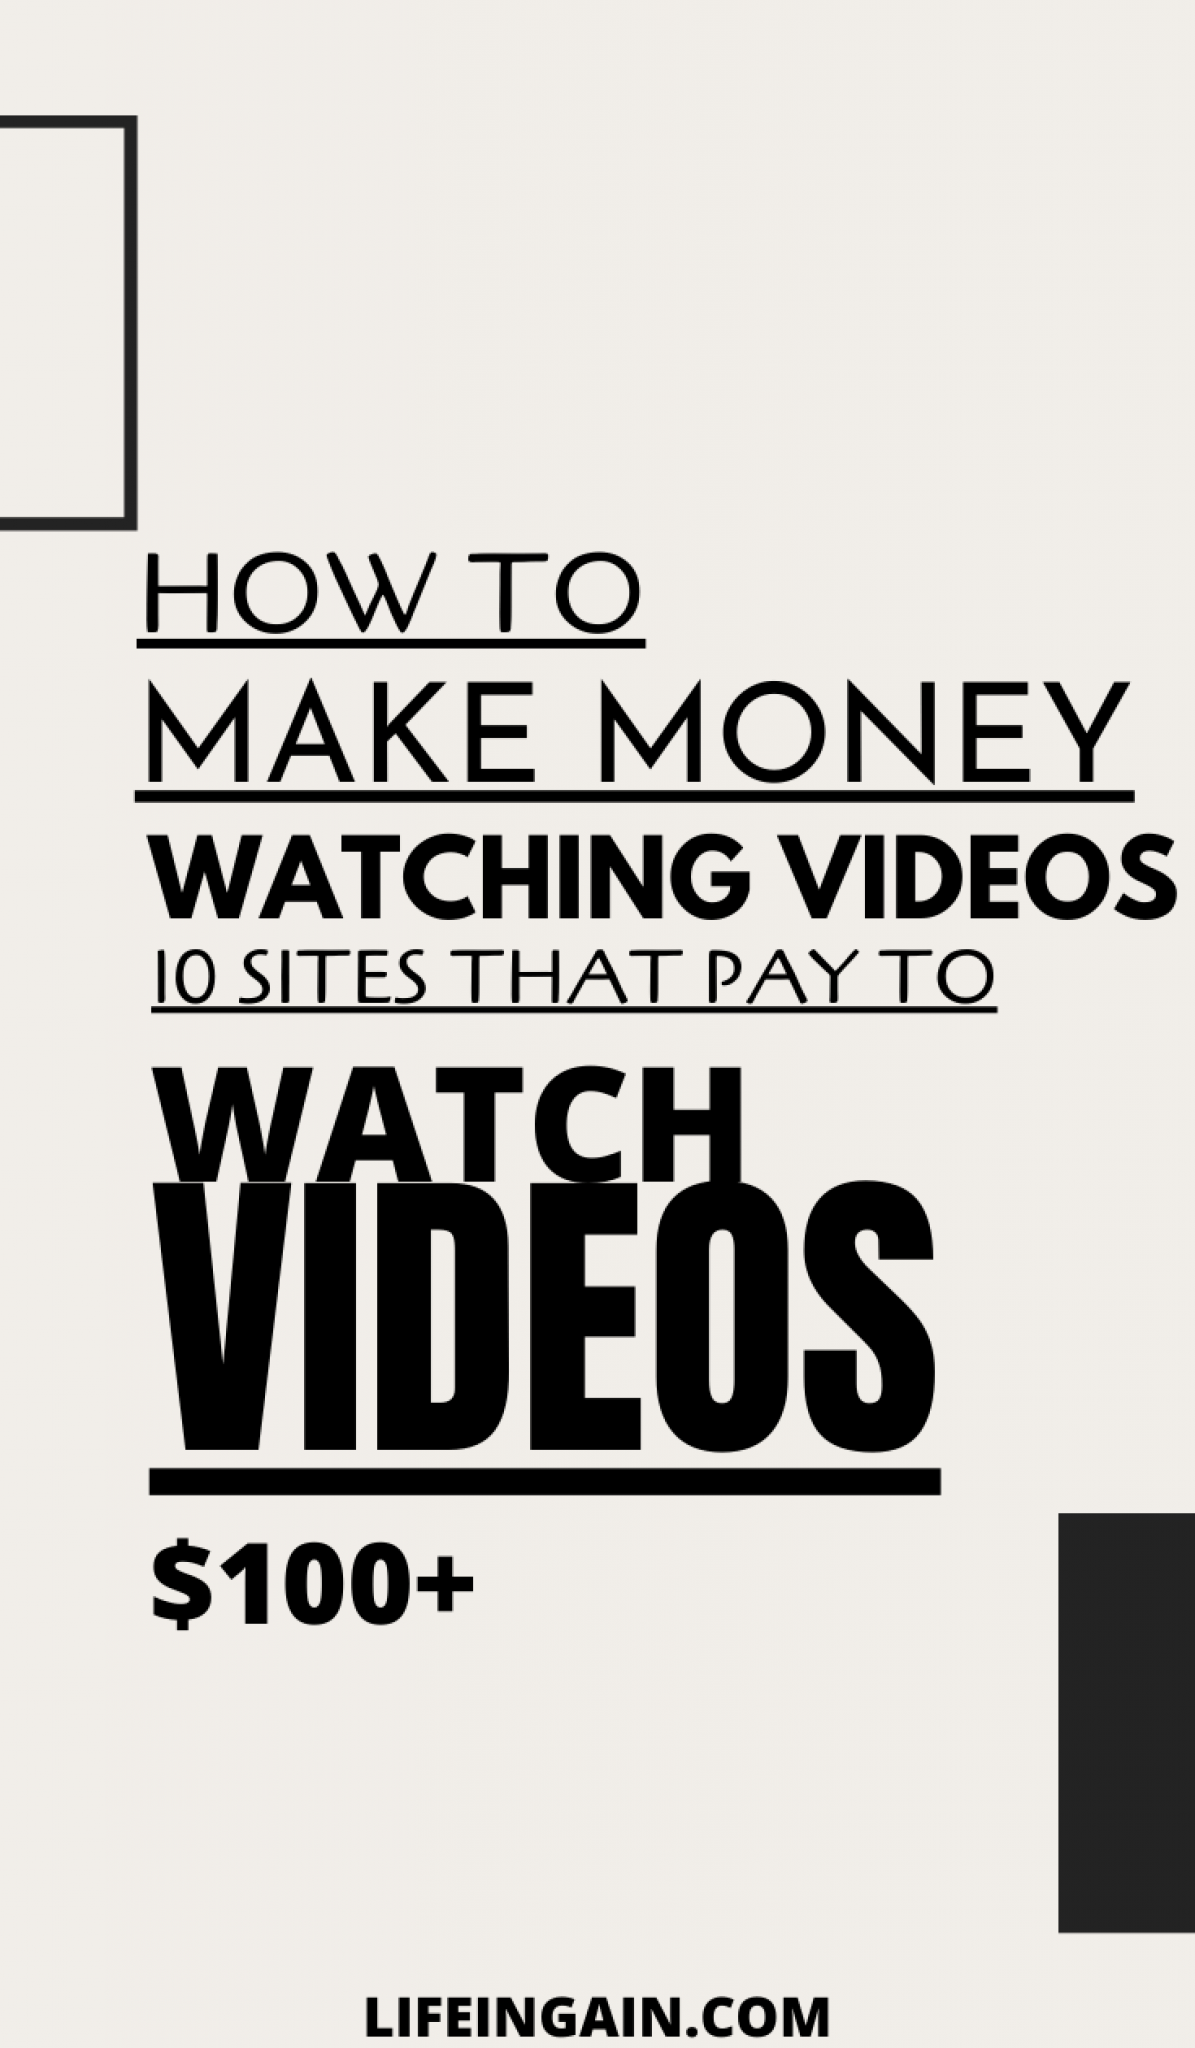 Make money watching videos 10 sites that pay to watch videos | Lifeingain